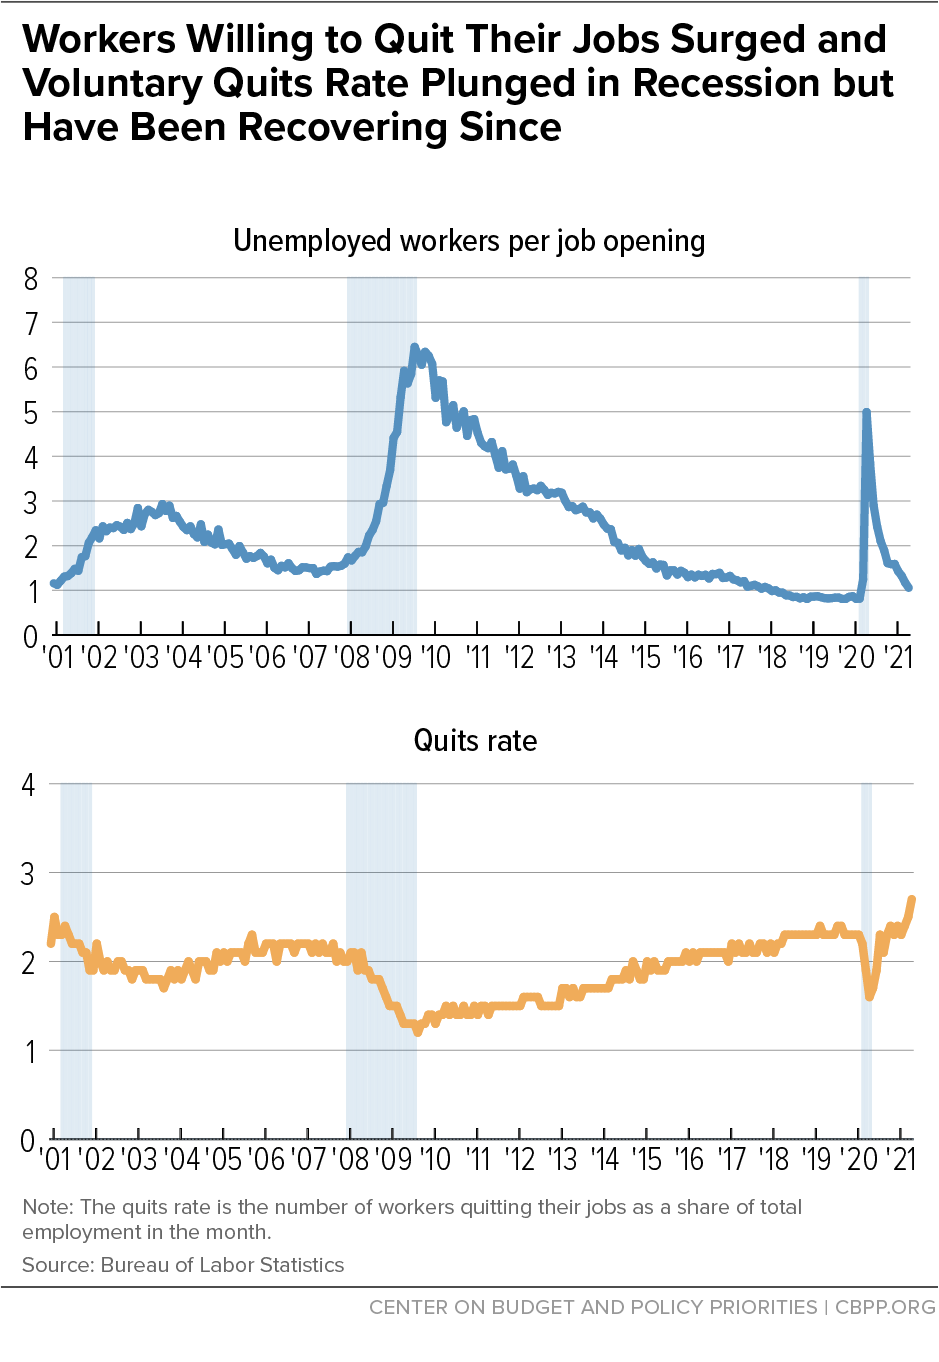 Coronavirus Pandemic Wiped Out Favorable Trends in Unemployed Workers Per Job Opening and Workers Willing to Quit Their Jobs